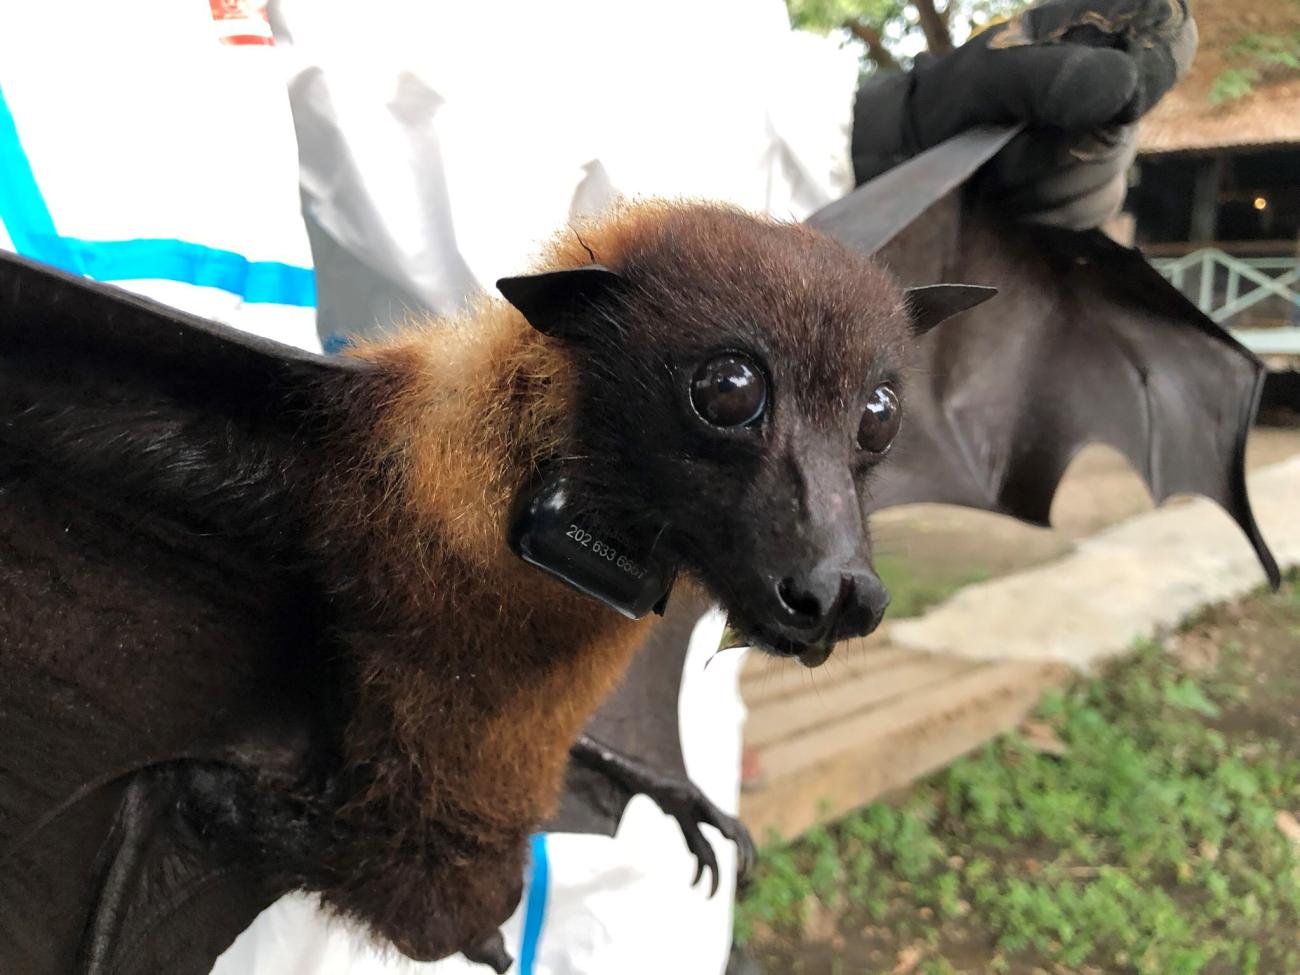 A wildlife veterinarian holds a large fruit bat wearing a satellite GPS trackin collar